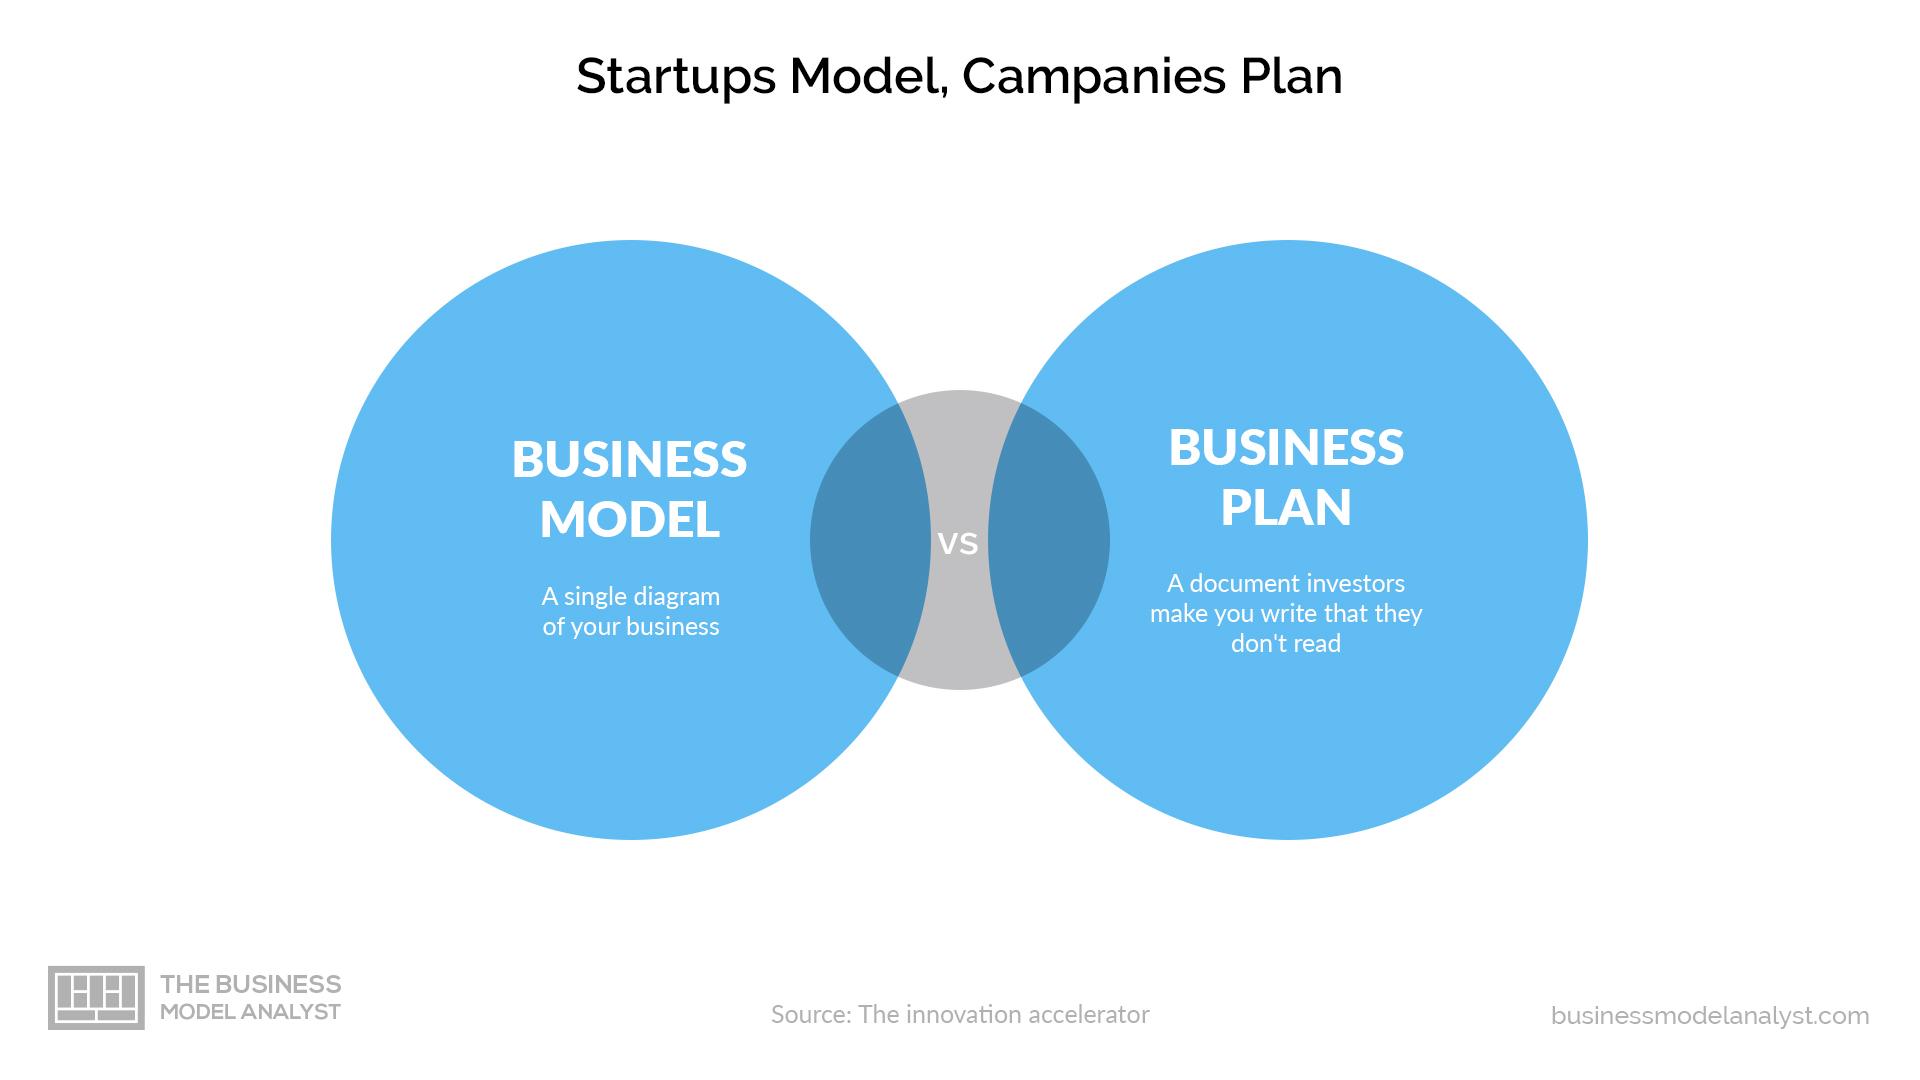 business model and business plan difference